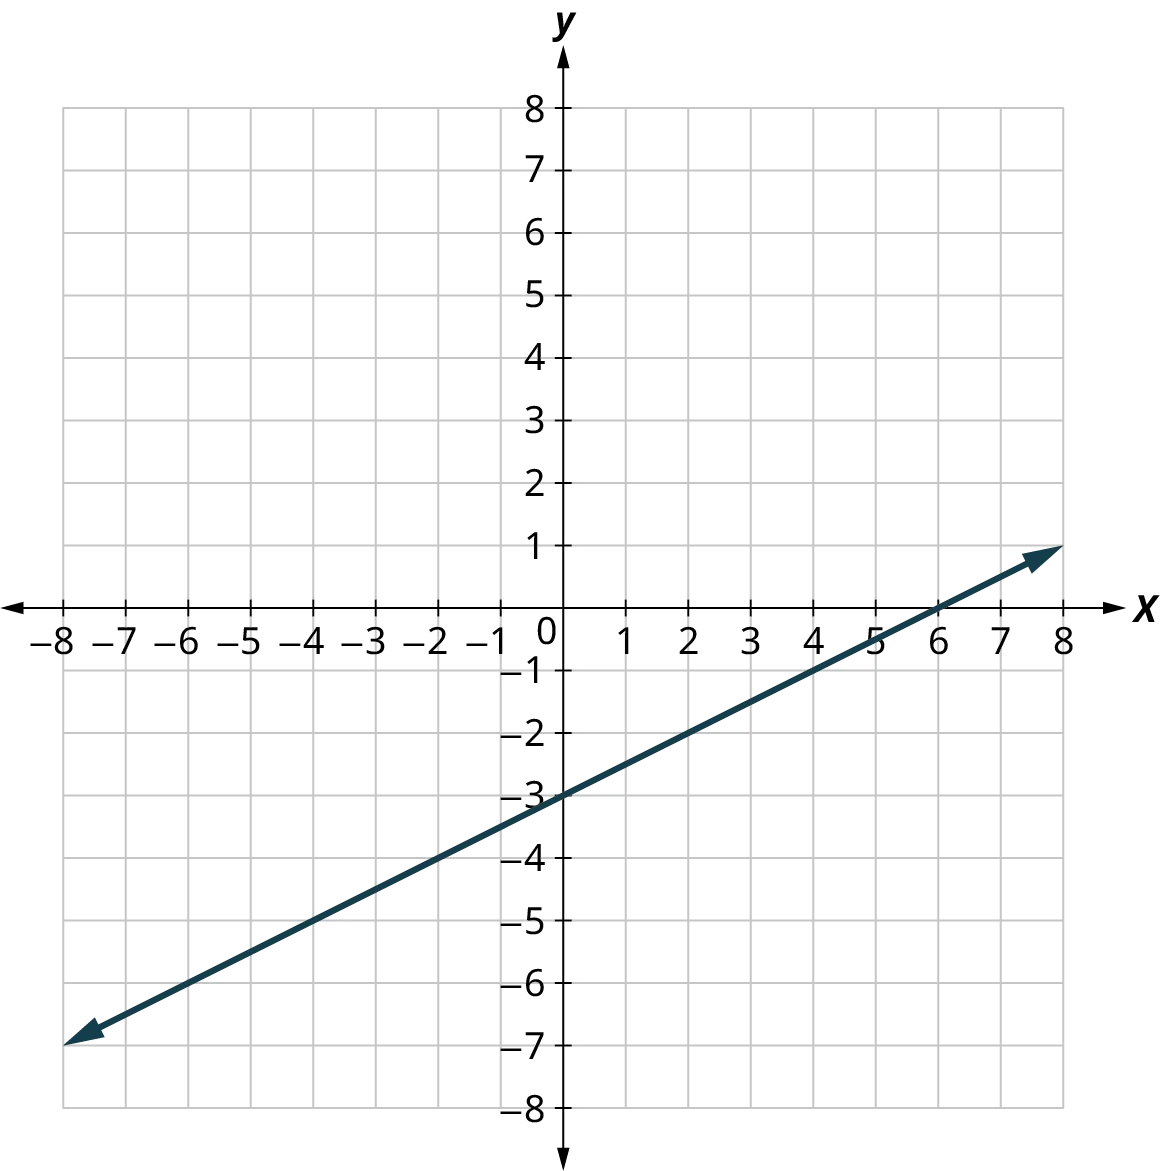 A line is plotted on an x y coordinate plane. The x and y axes range from negative 8 to 8, in increments of 1. The line passes through the points, (negative 6, negative 6), (0, negative 3), and (6, 0).